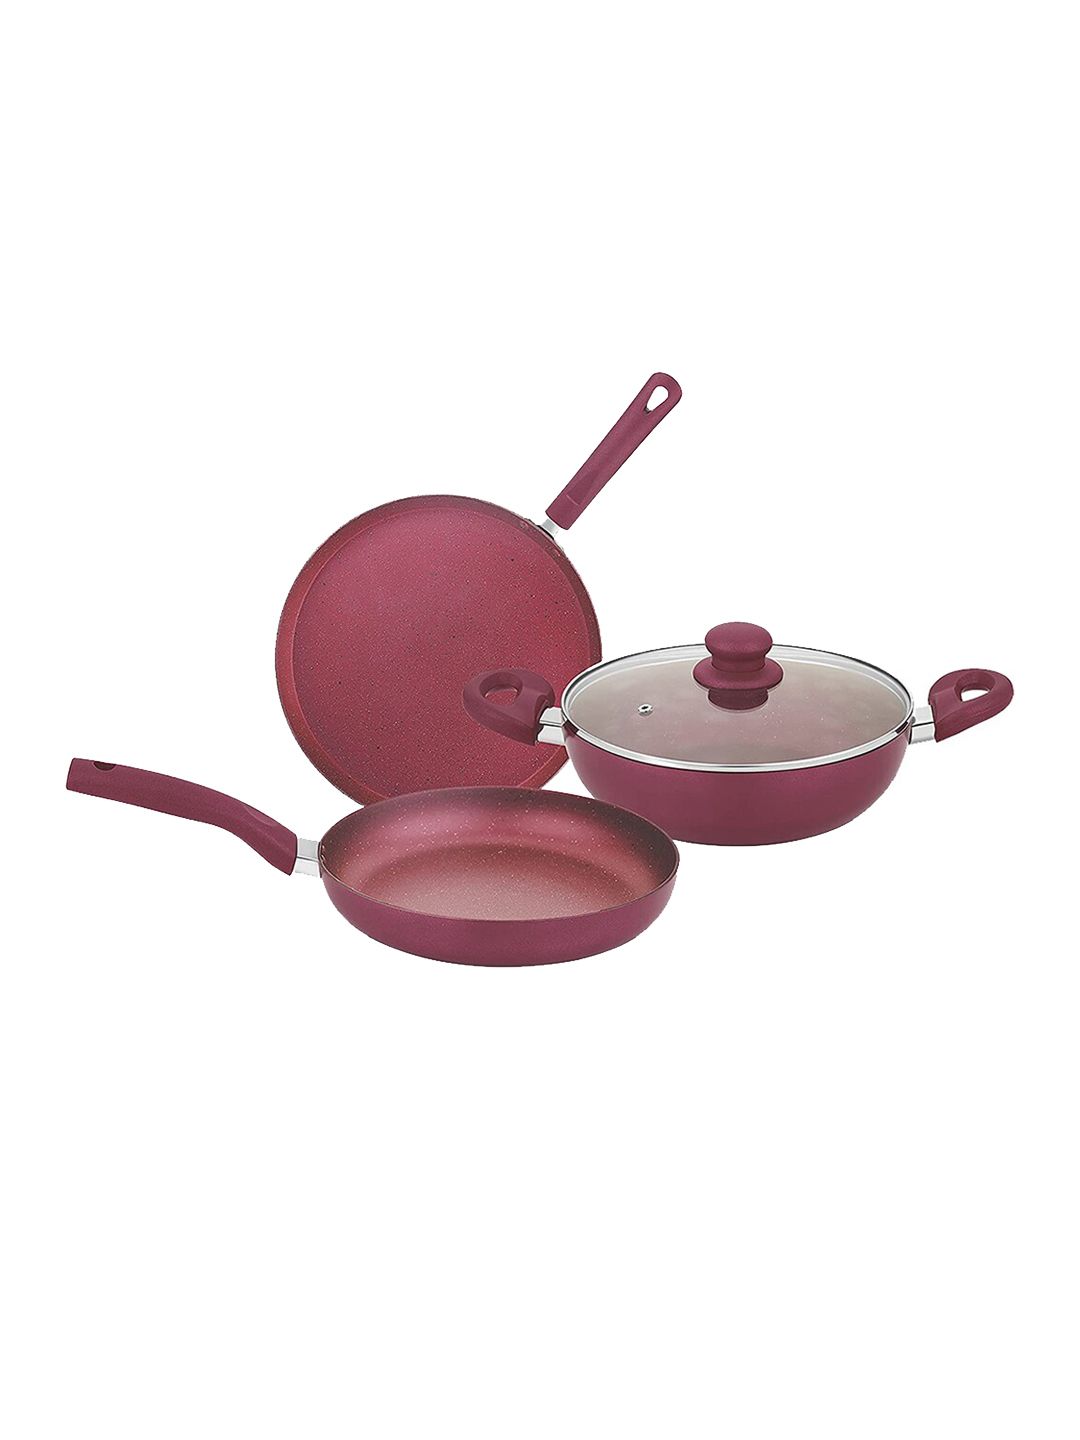 BERGNER Set Of 4 Red Sherry Non-Stick Cookware Set Price in India